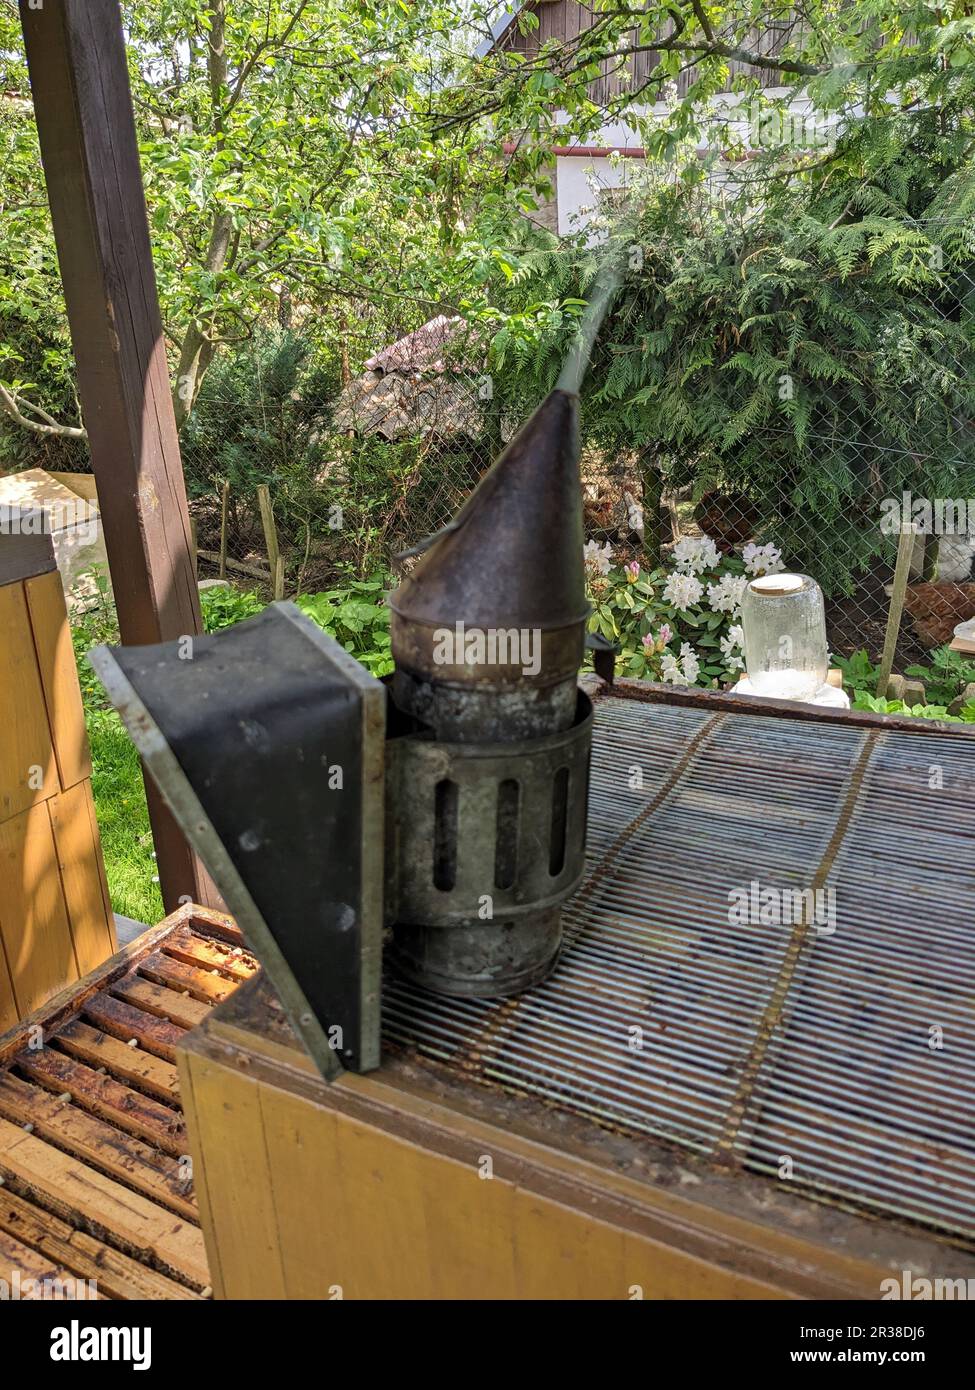 Chimney for flashing bees. The beekeeper's tool. Bee smoker smoking.Bee smoker is used to calm bees before frame removal. Stock Photo